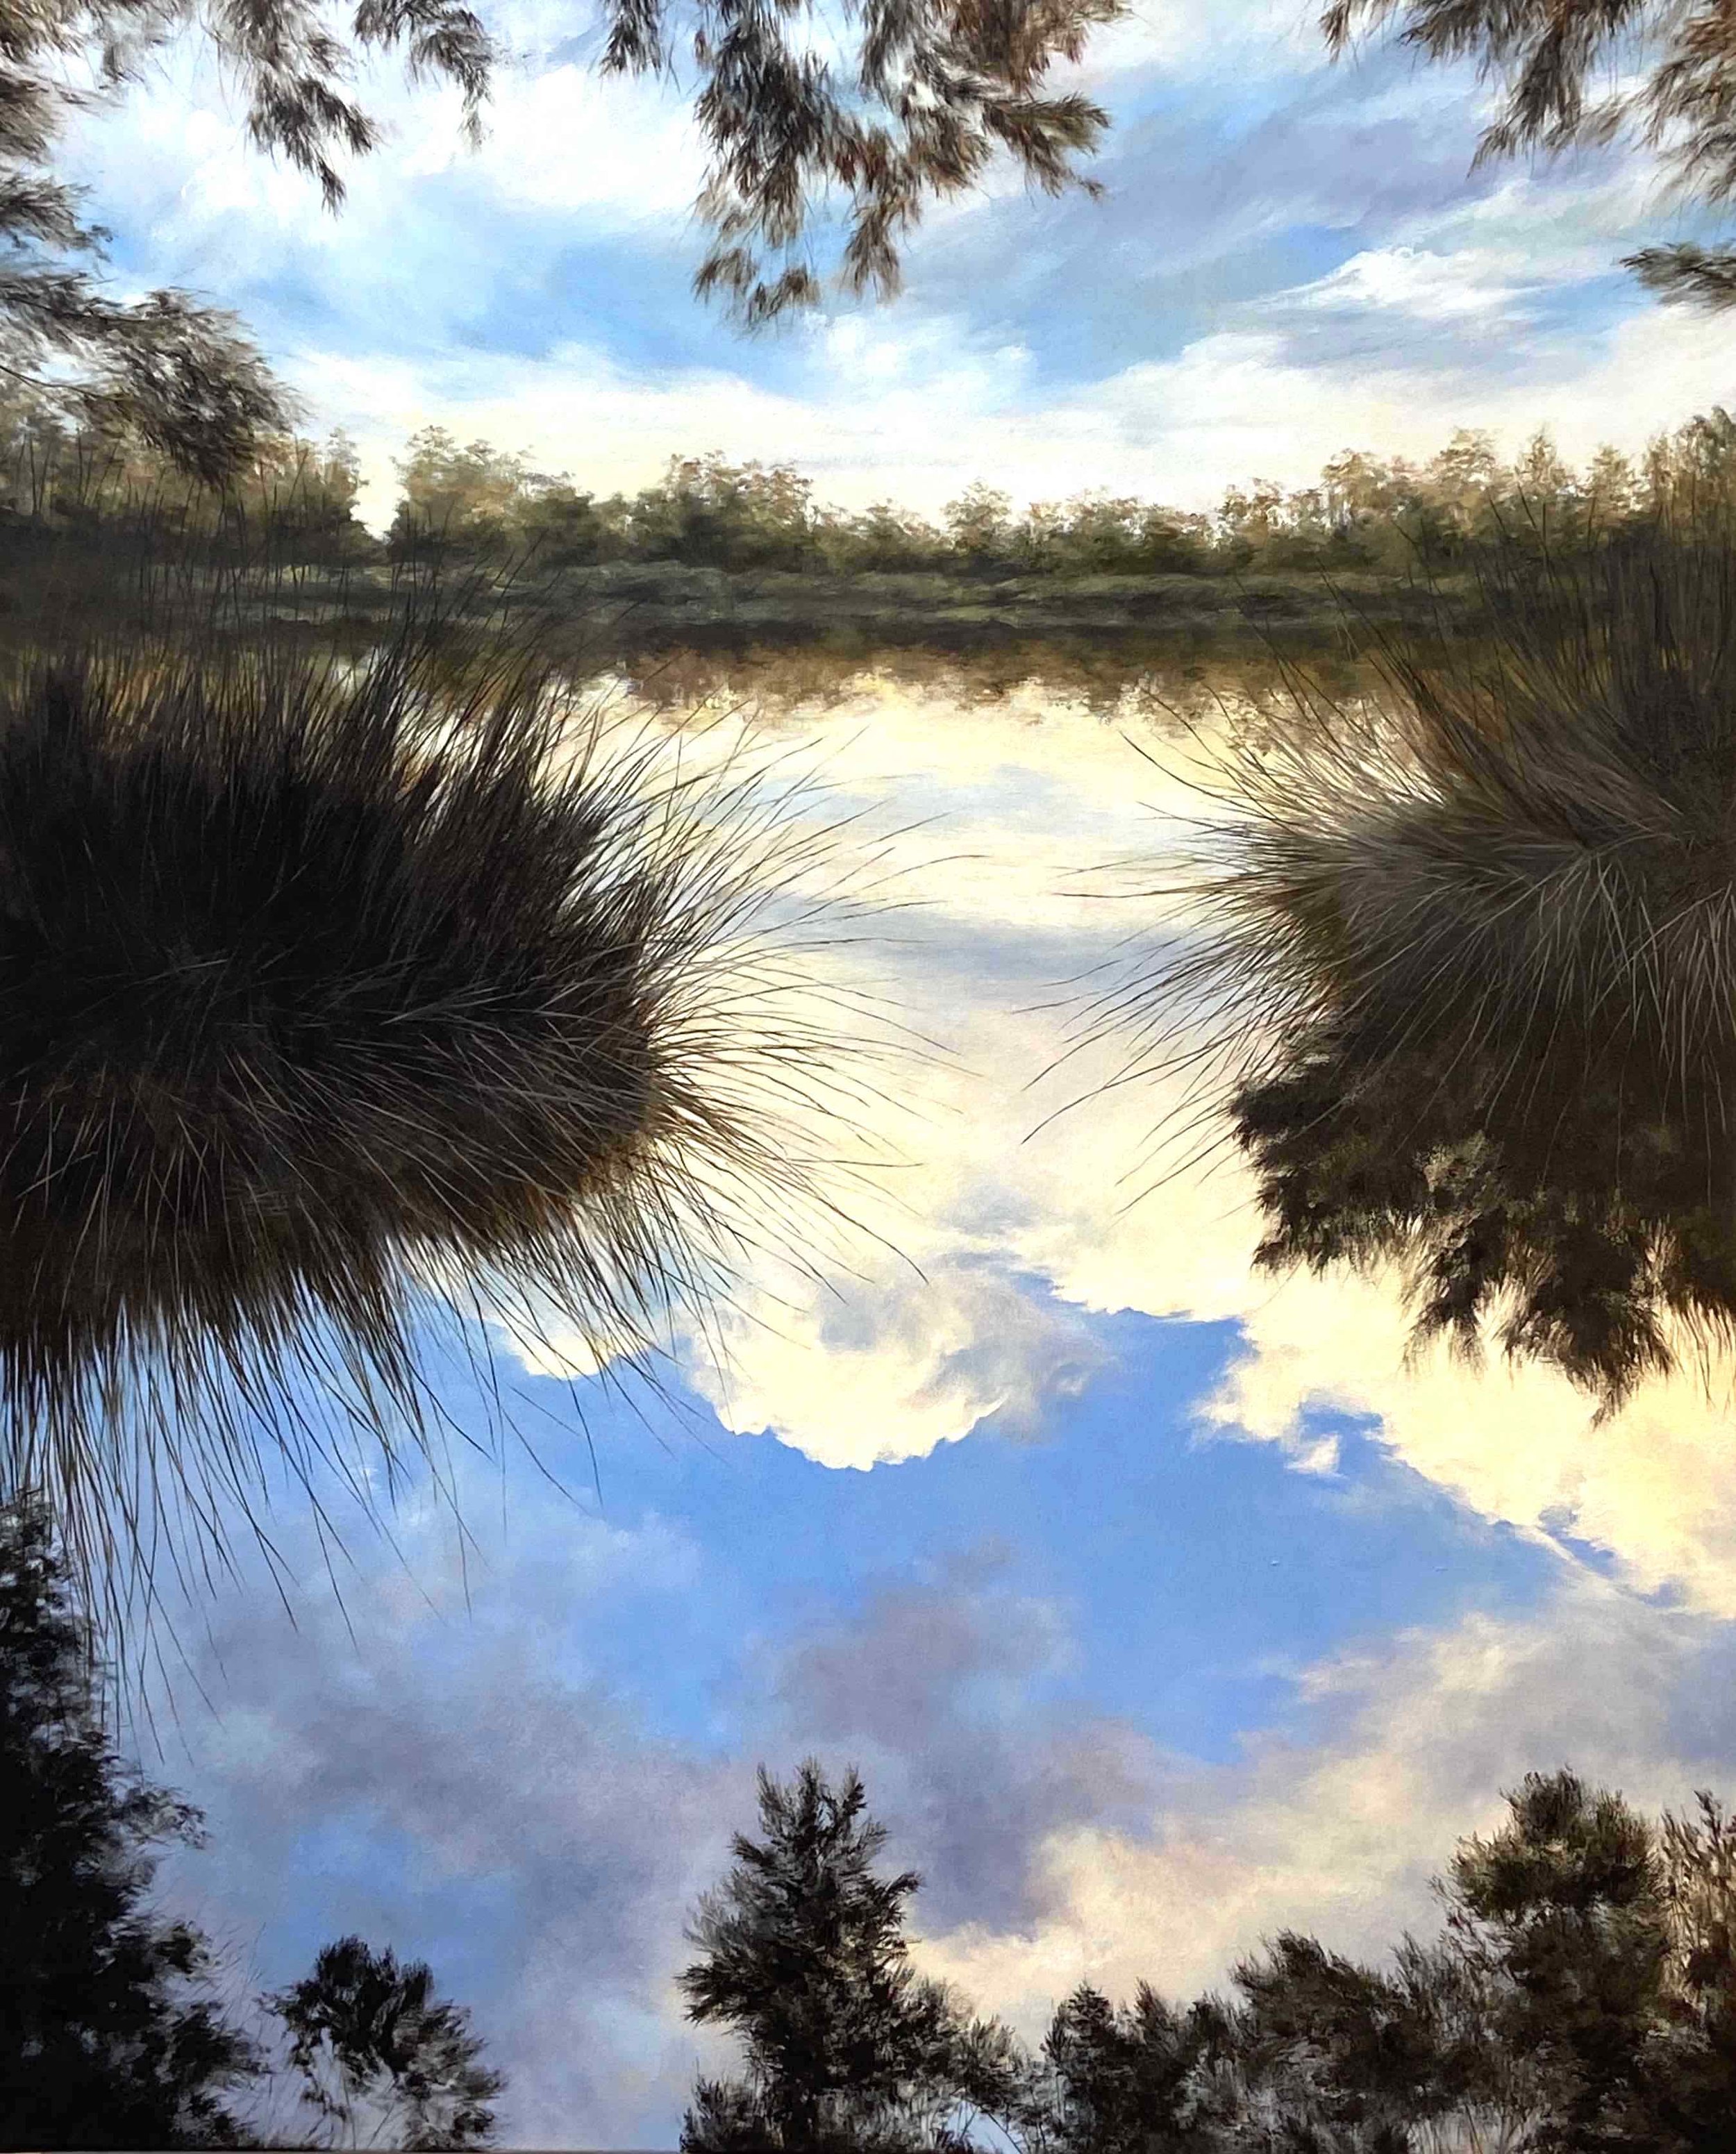 Reflections, Oil on canvas, 110 x 75 cm, Sold